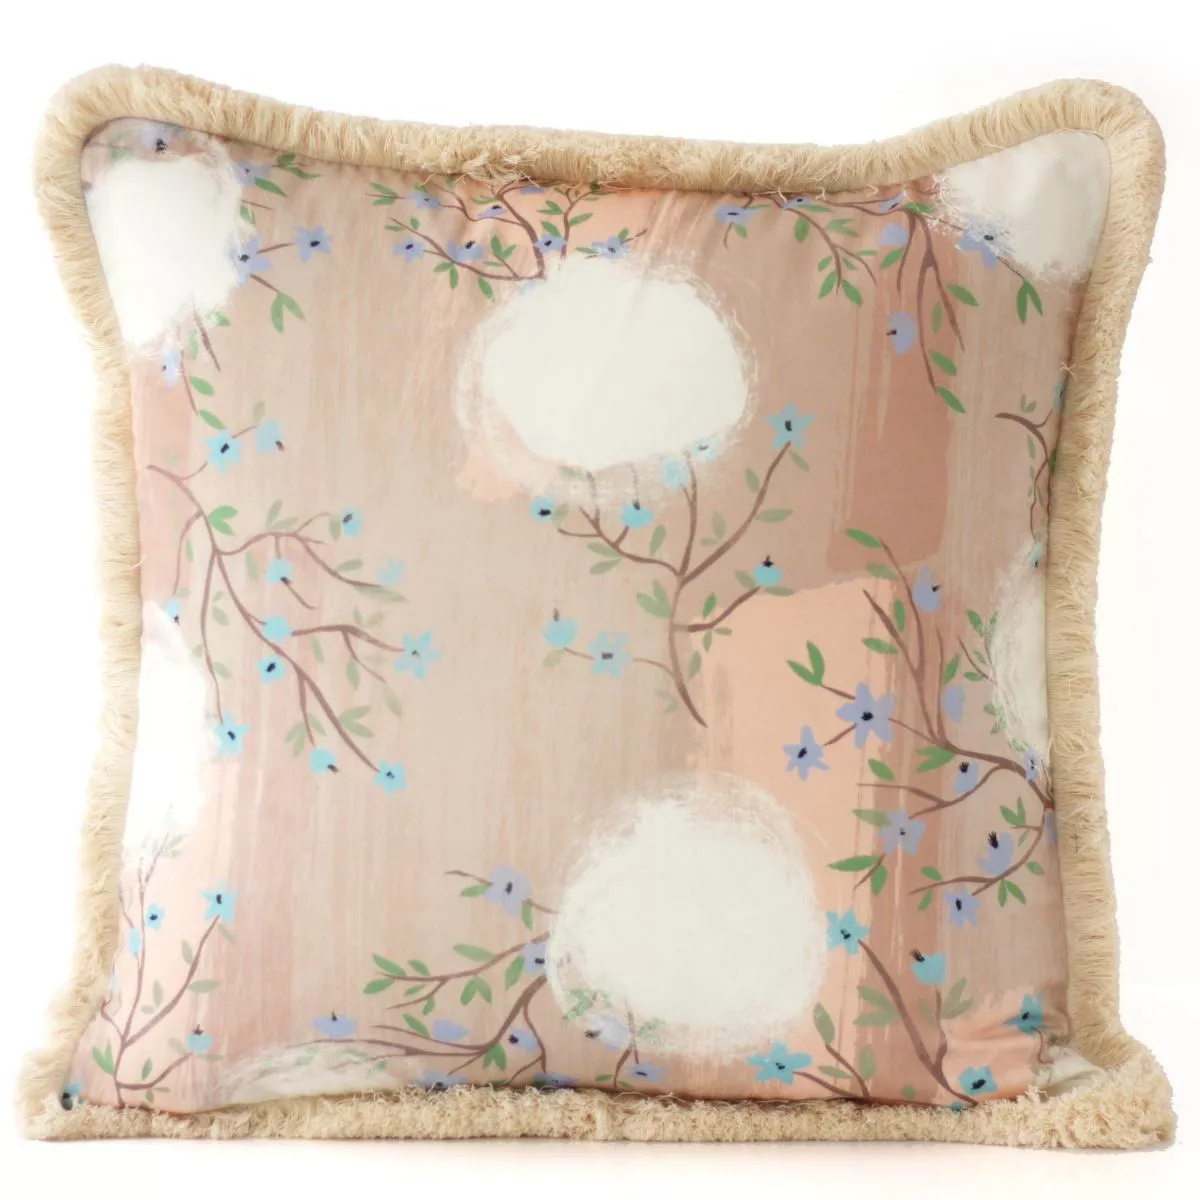 Large Sofa Cushion with Flower Motif as Print on Cotton (55 x 55 cm)